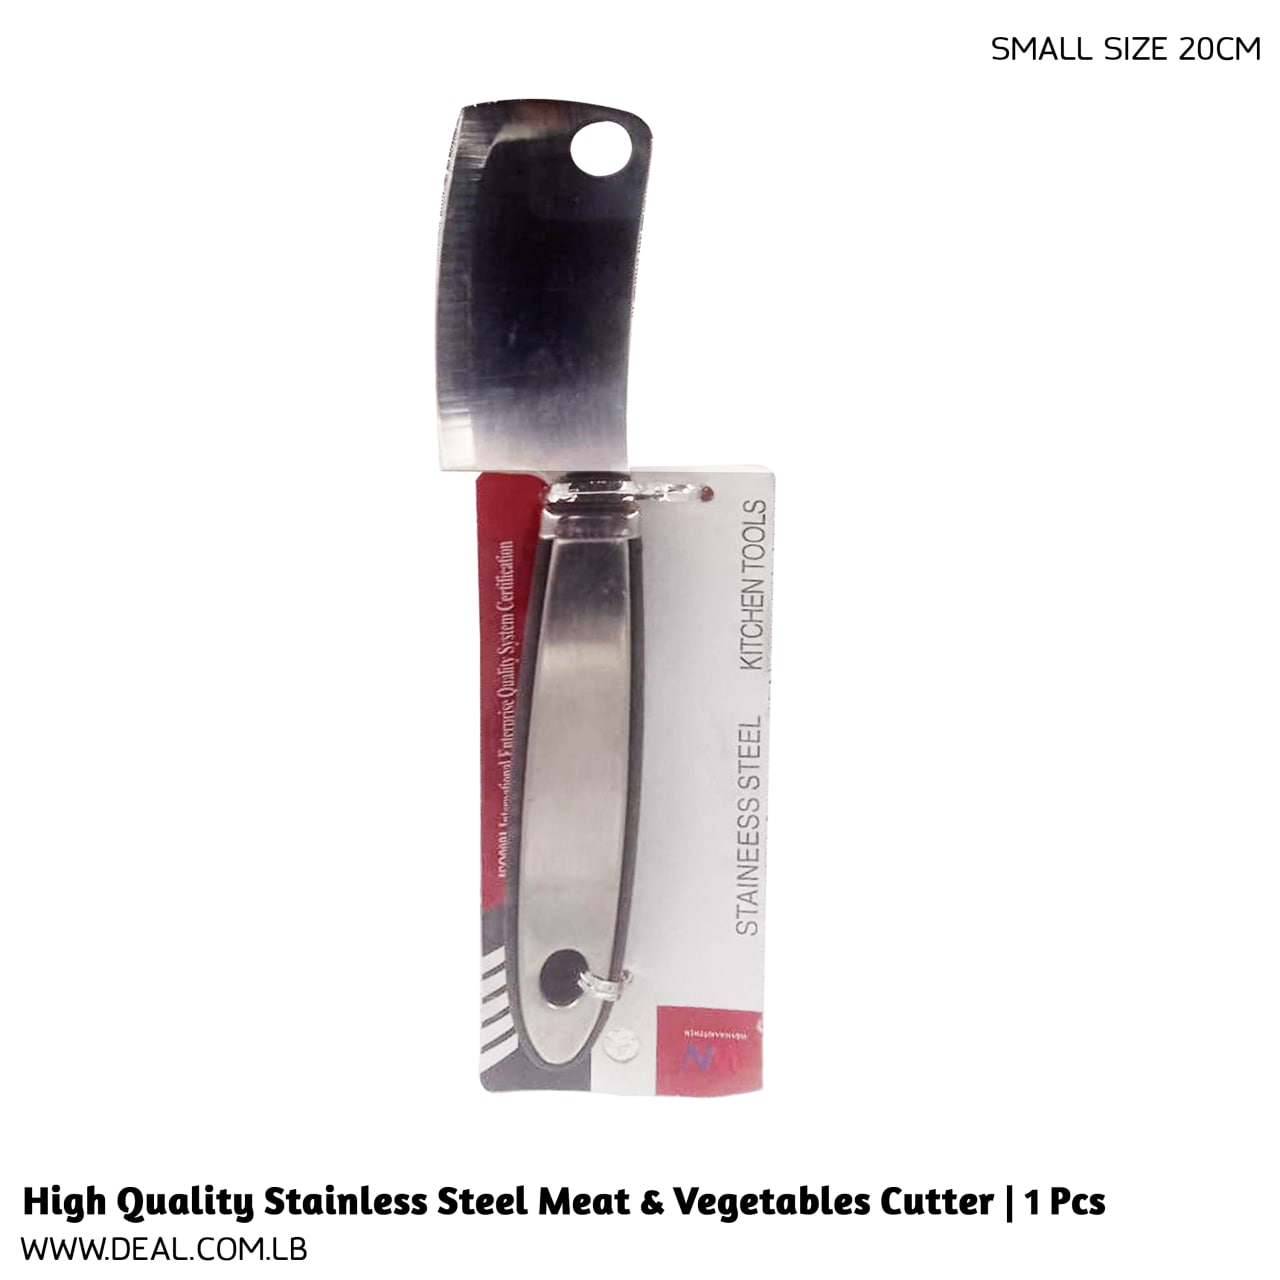 High Quality Stainless Steel Meat & Vegetables Cutter | 1 Pcs